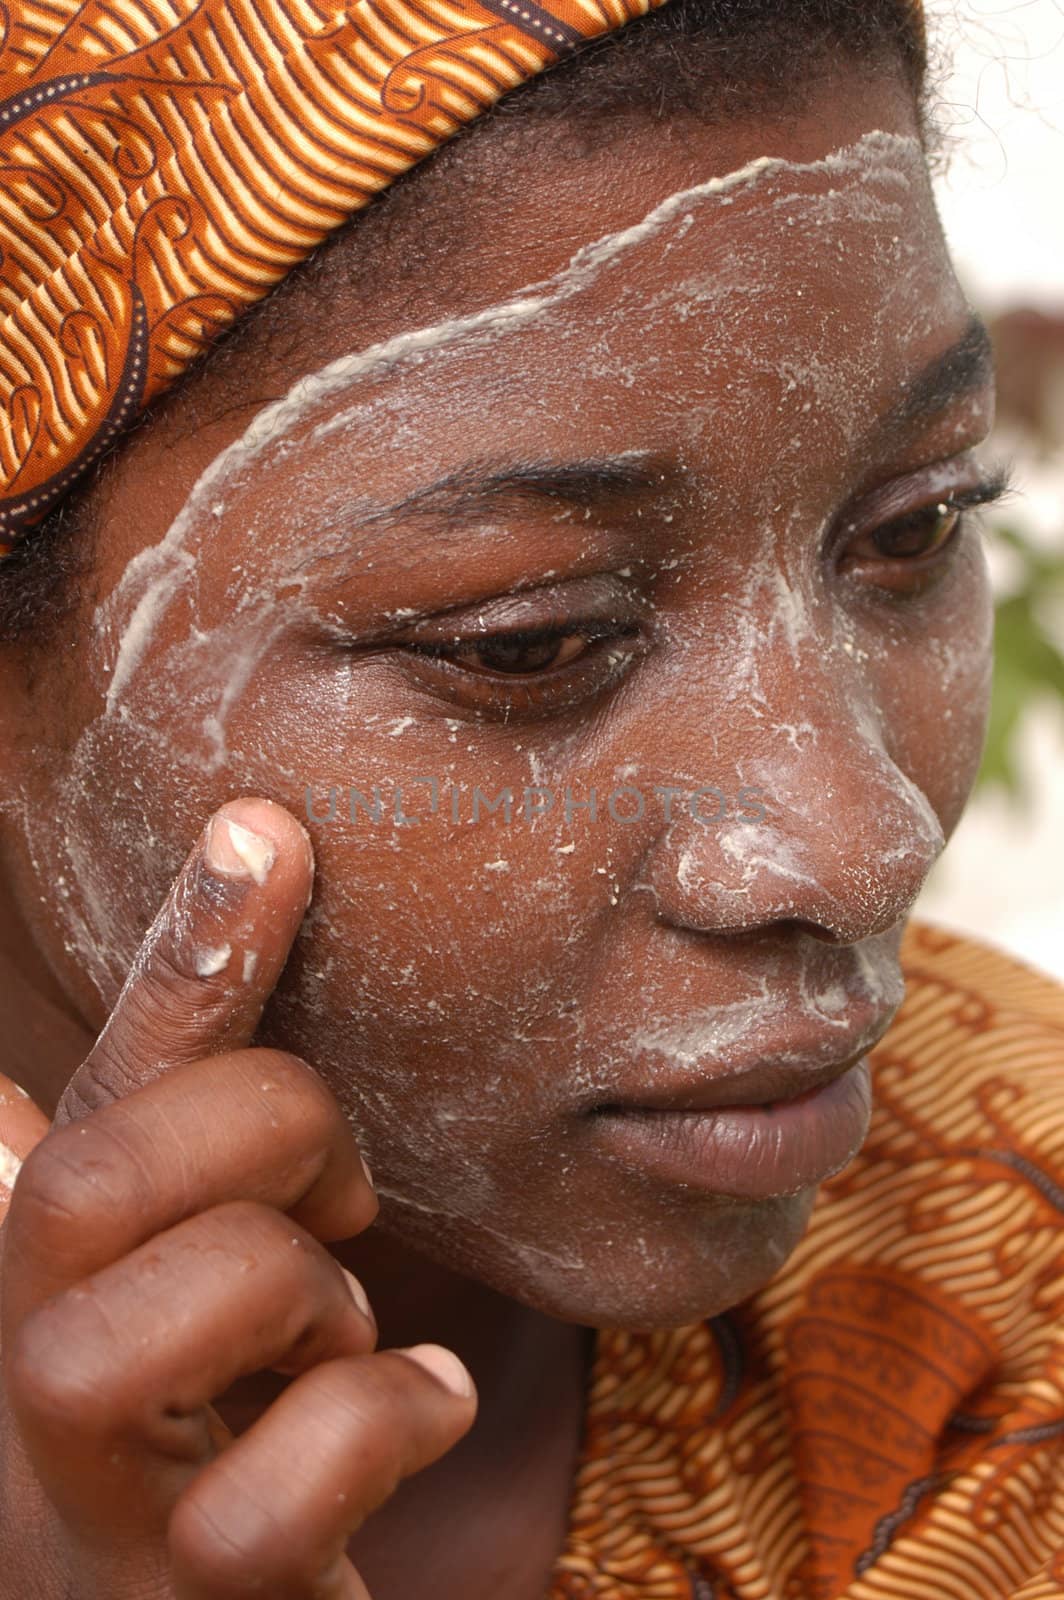 Mozambique Island, Mozambique, may 2, 2004: African woman with the cream of Musiro a paste obtained by rubbing a stone on a piece of a tree branch Olax locale.Il miraculous mixture is used to treat the skin. Does it make it softer and removes stains.